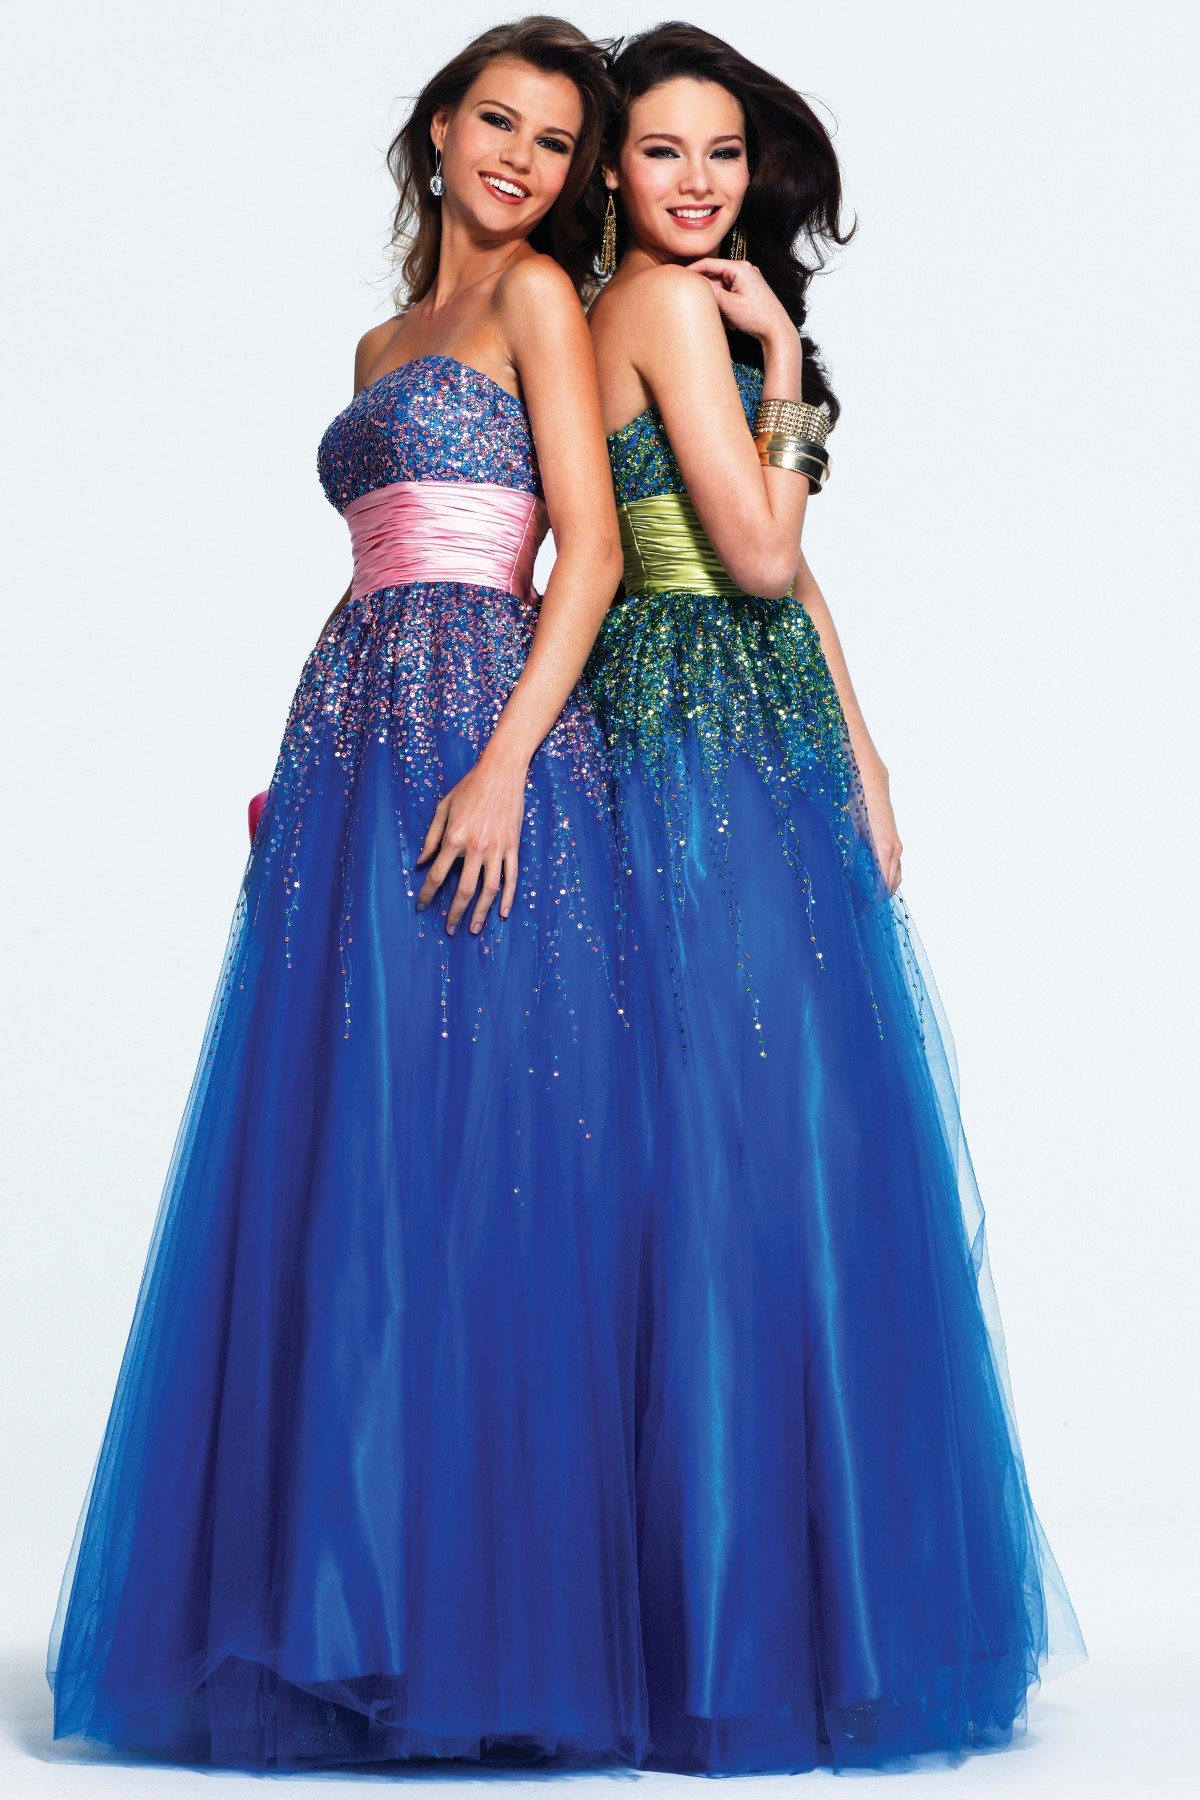 Royal Blue Strapless Low Back Empire Floor Length A Line Tulle Sexy Dresses With Sequins And Belt